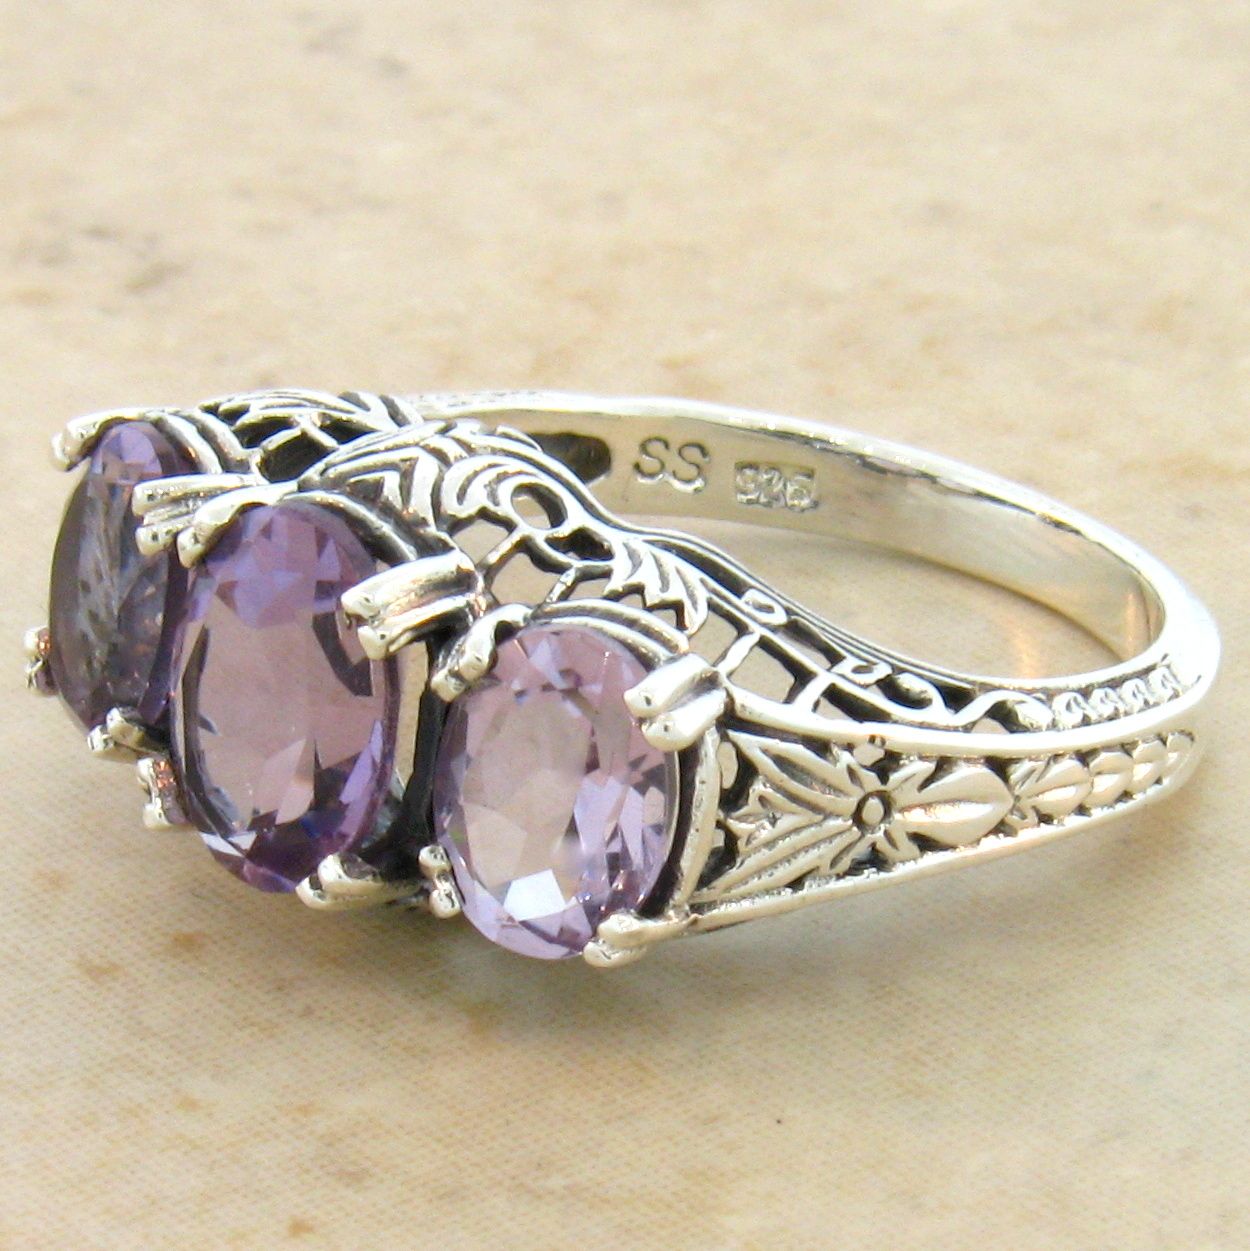 Details about  / Size 8 Double Round Purple Brazil Natural AMETHYST Ring 925 STERLING SILVER #21